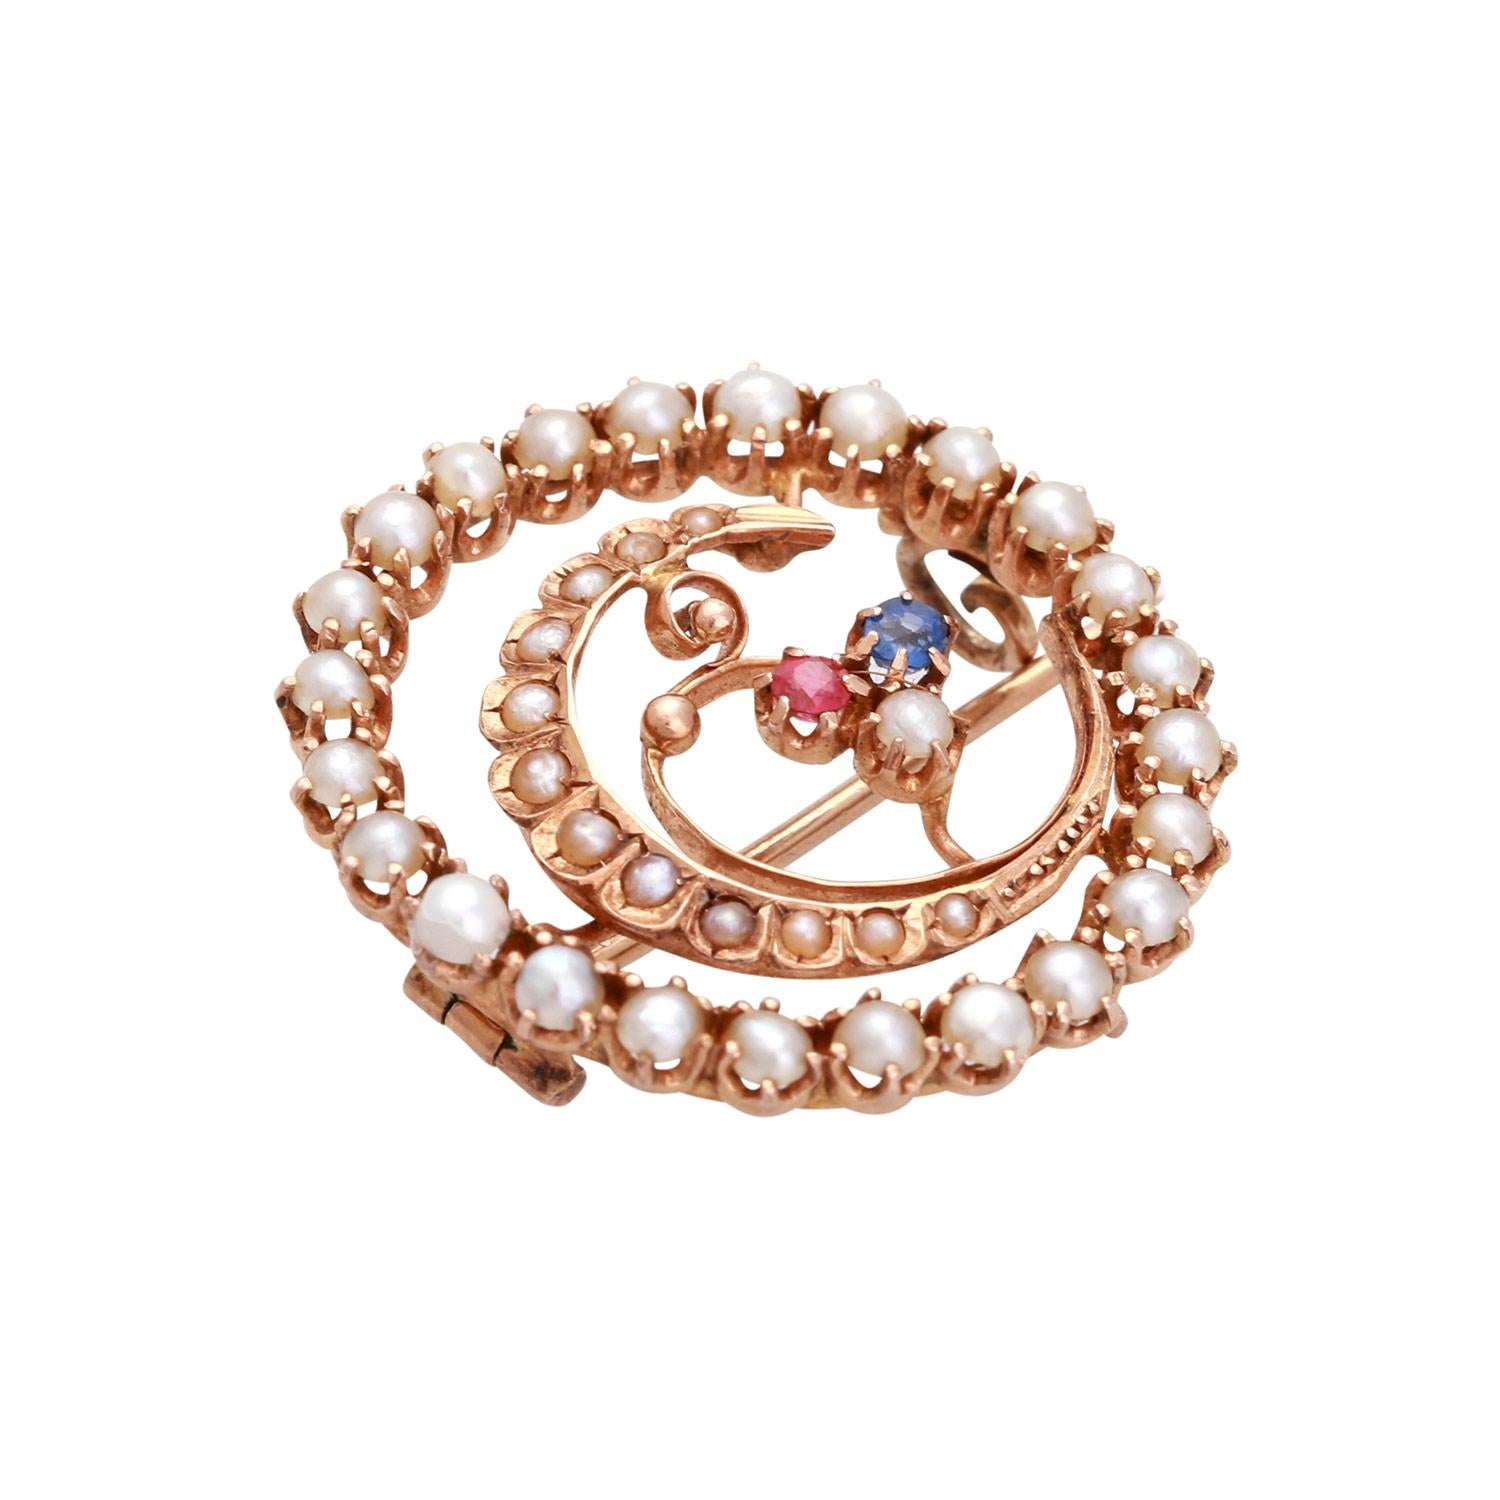 Baroque Revival Round Brooch with Half Pearls For Sale